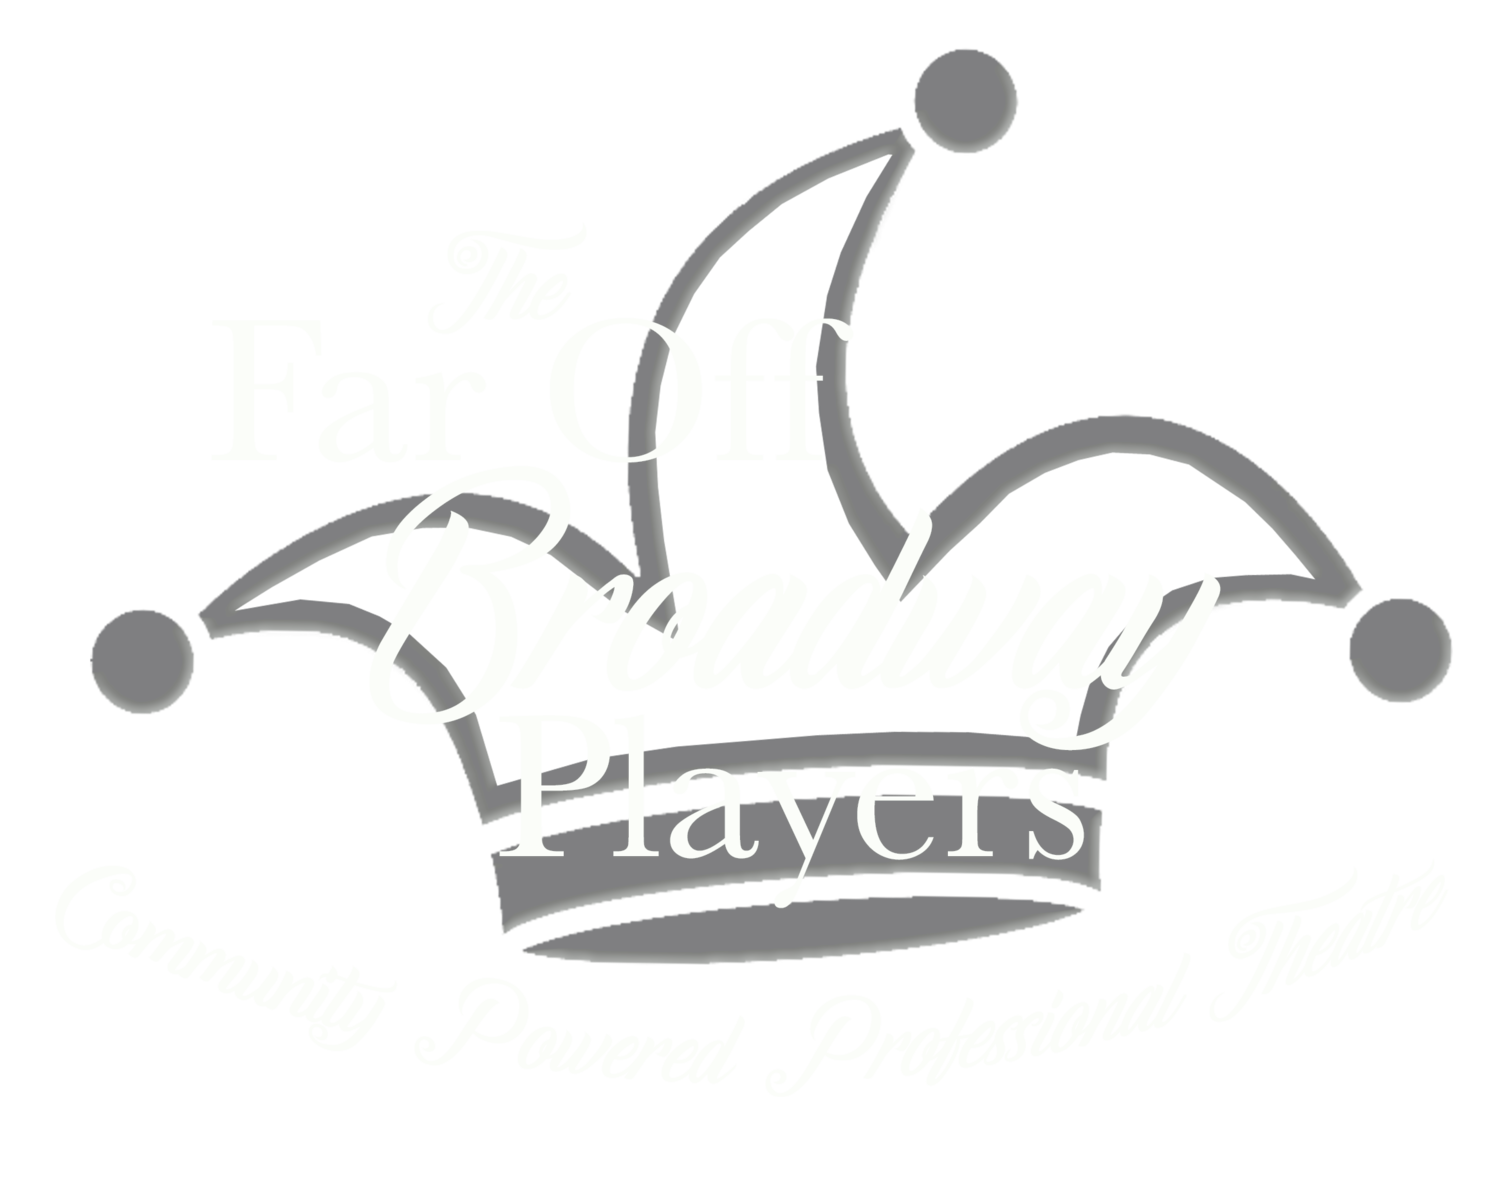 The Far Off Broadway Players